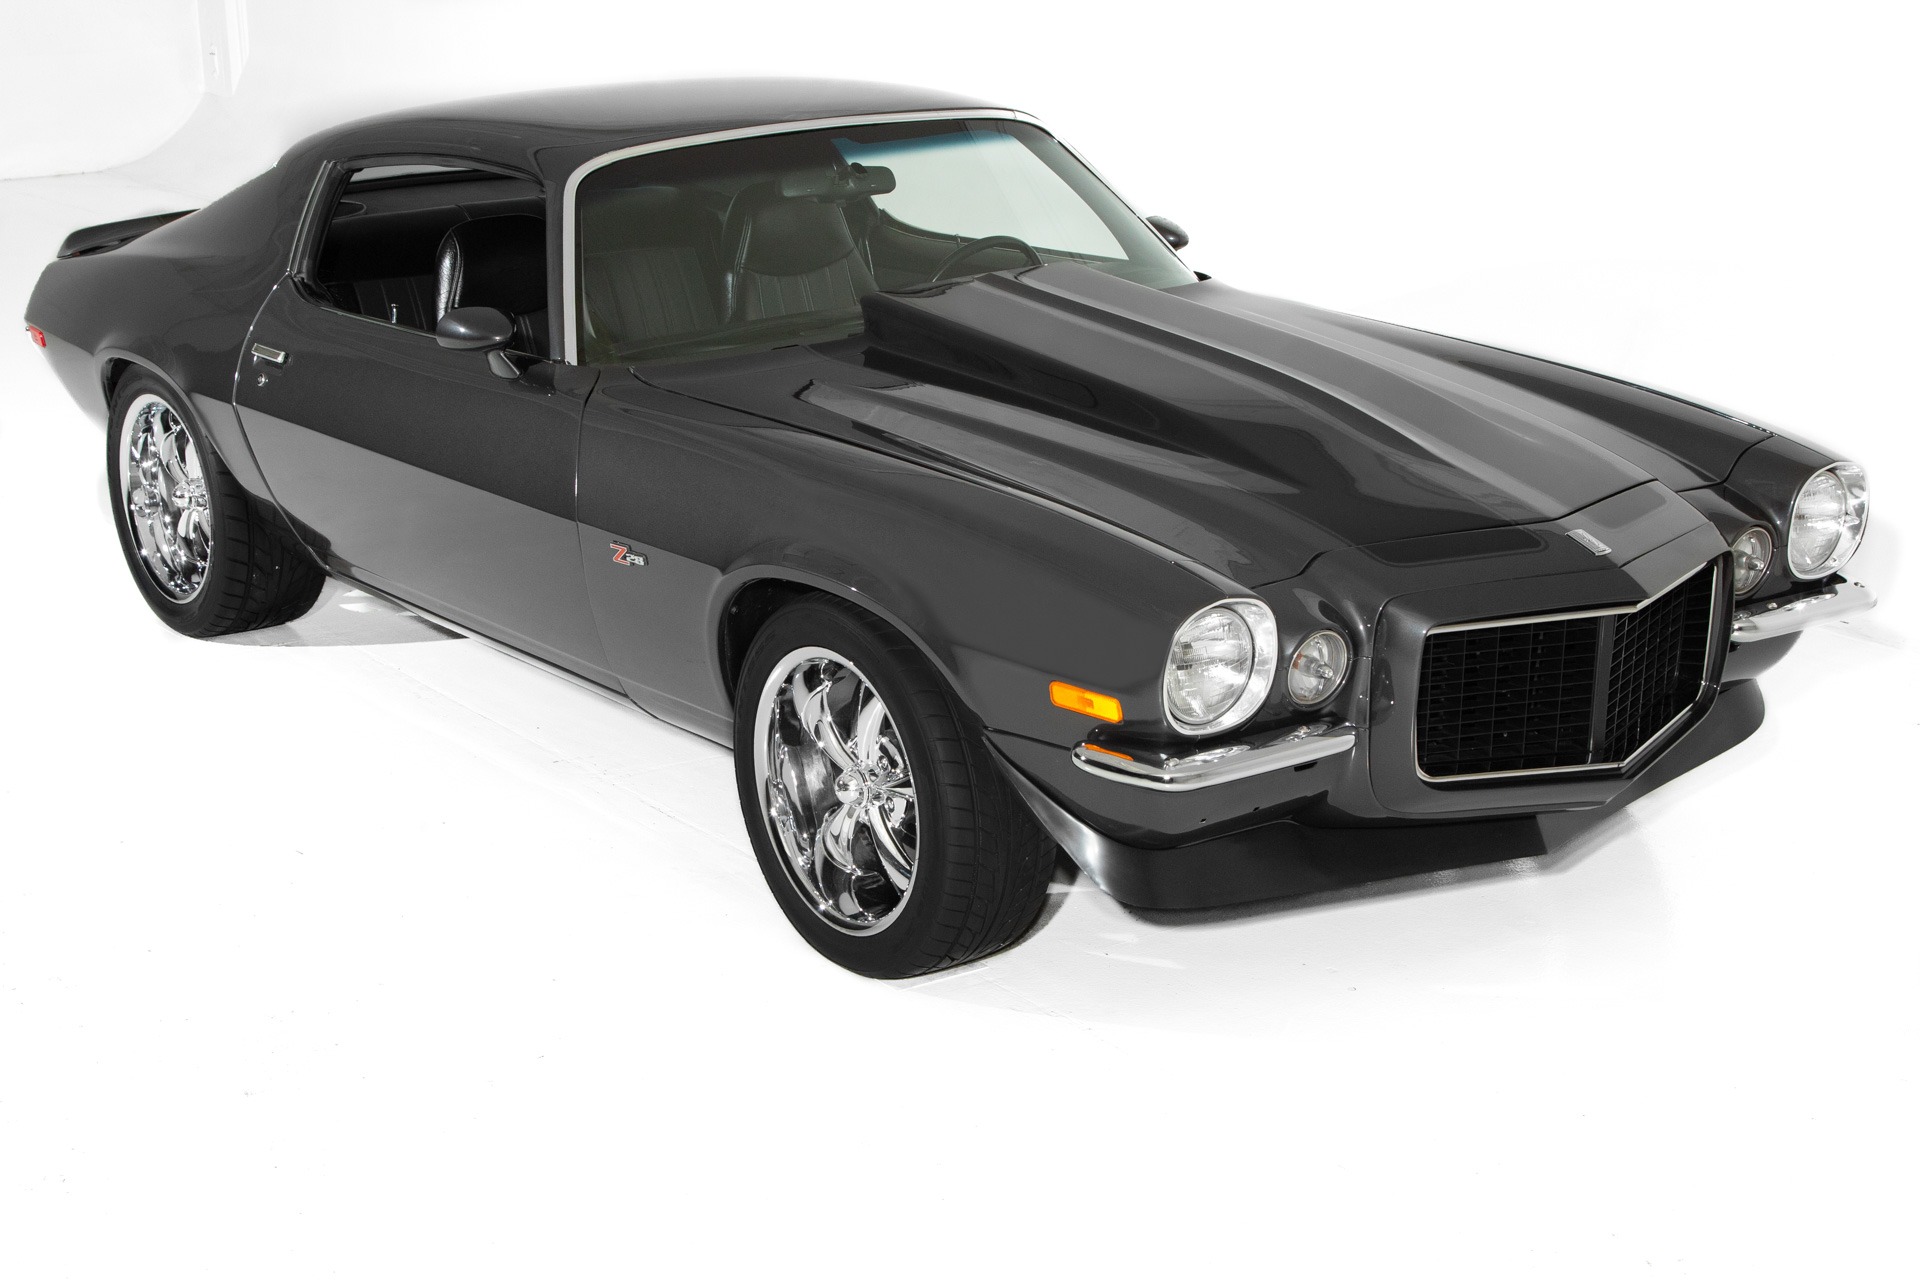 For Sale Used 1971 Chevrolet Camaro Charcoal, Black Stripes | American Dream Machines Des Moines IA 50309